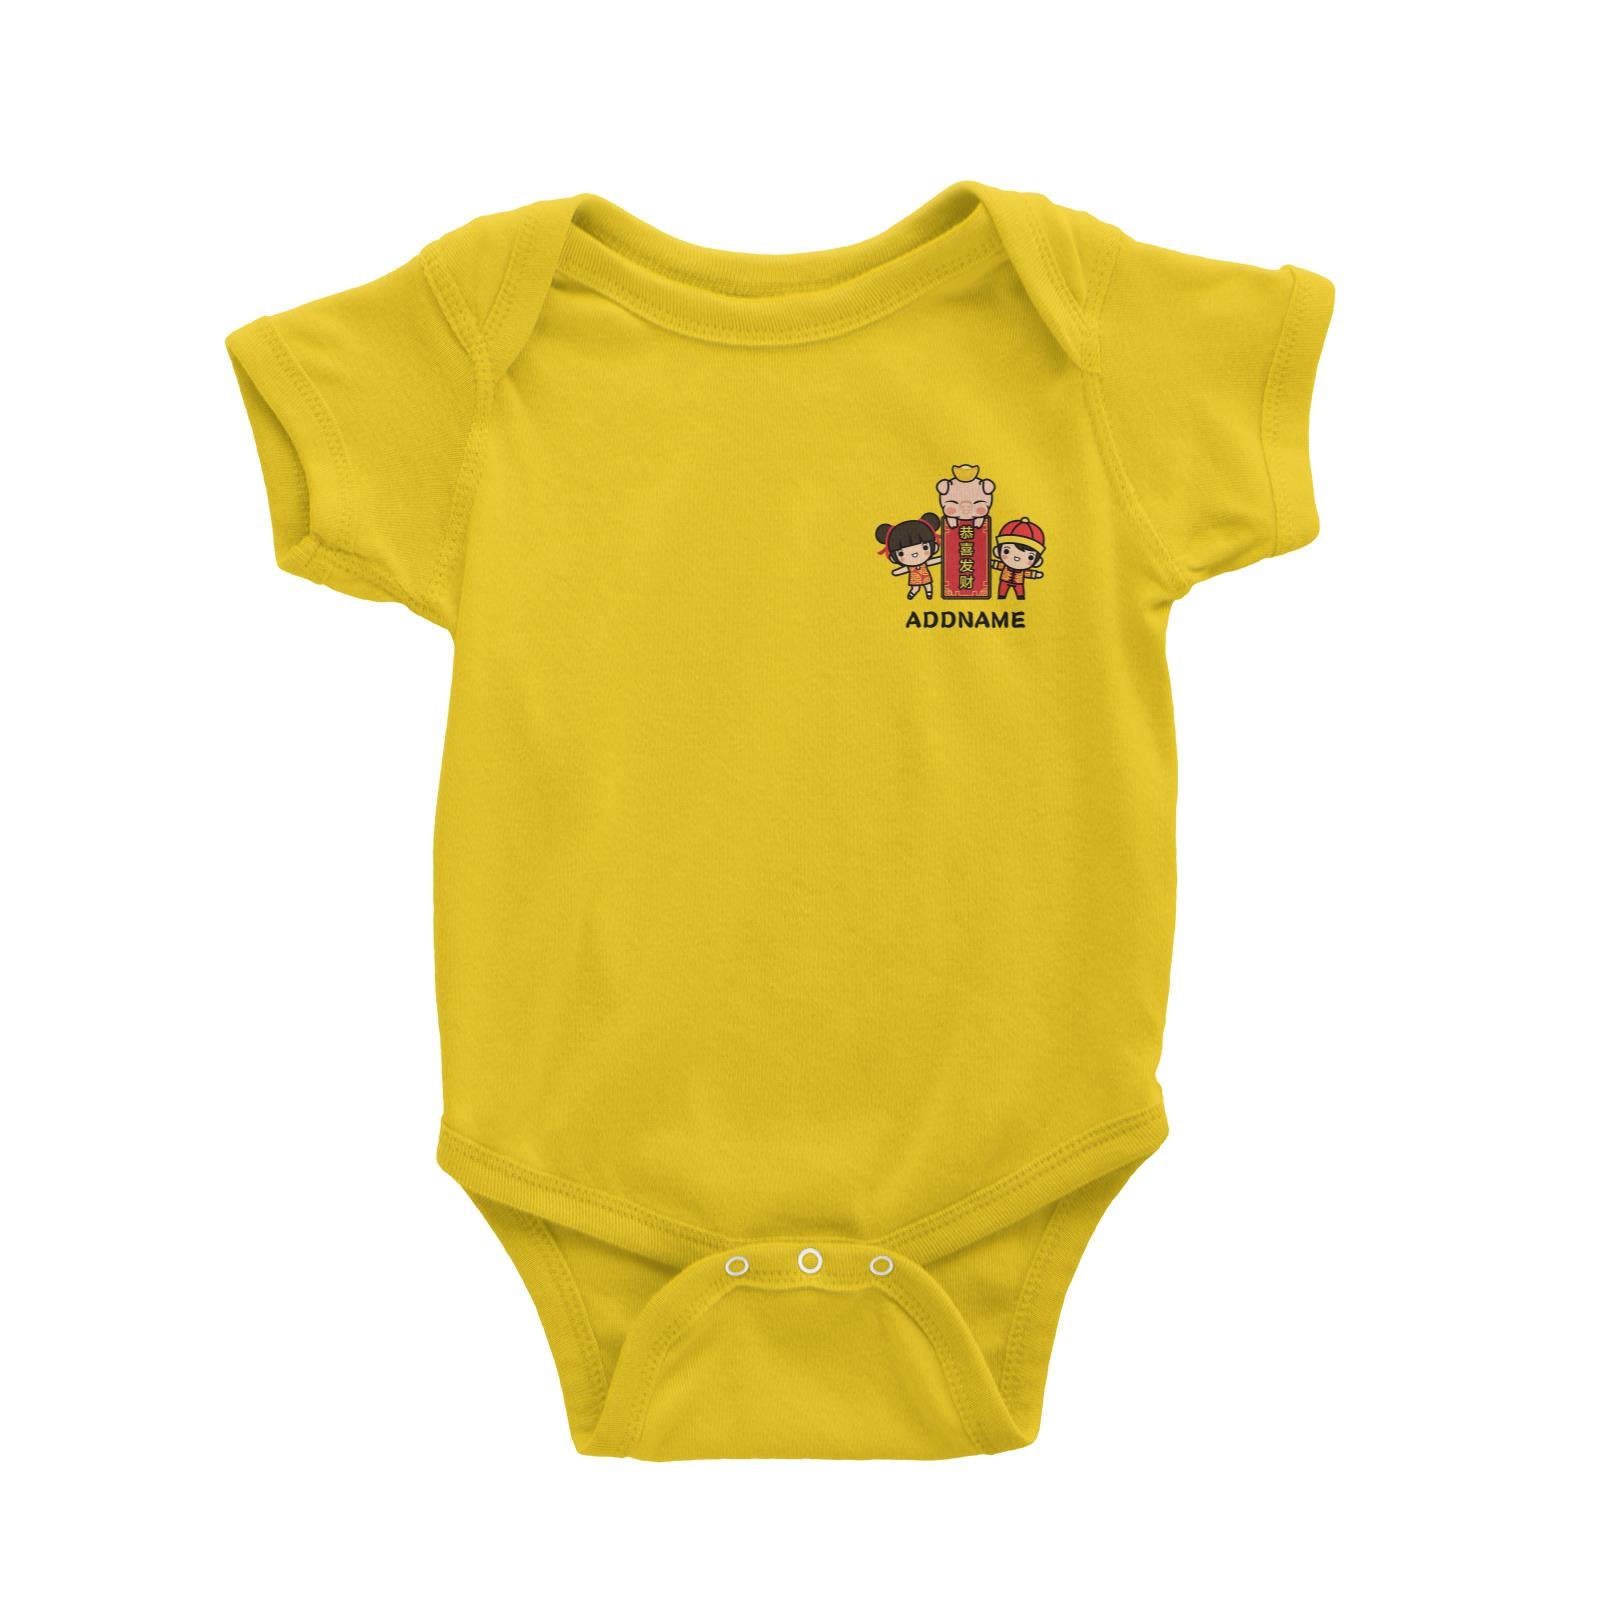 Prosperity Pig Boy, Girl and Baby Pig with Gold and Signage Pocket Design Baby Romper